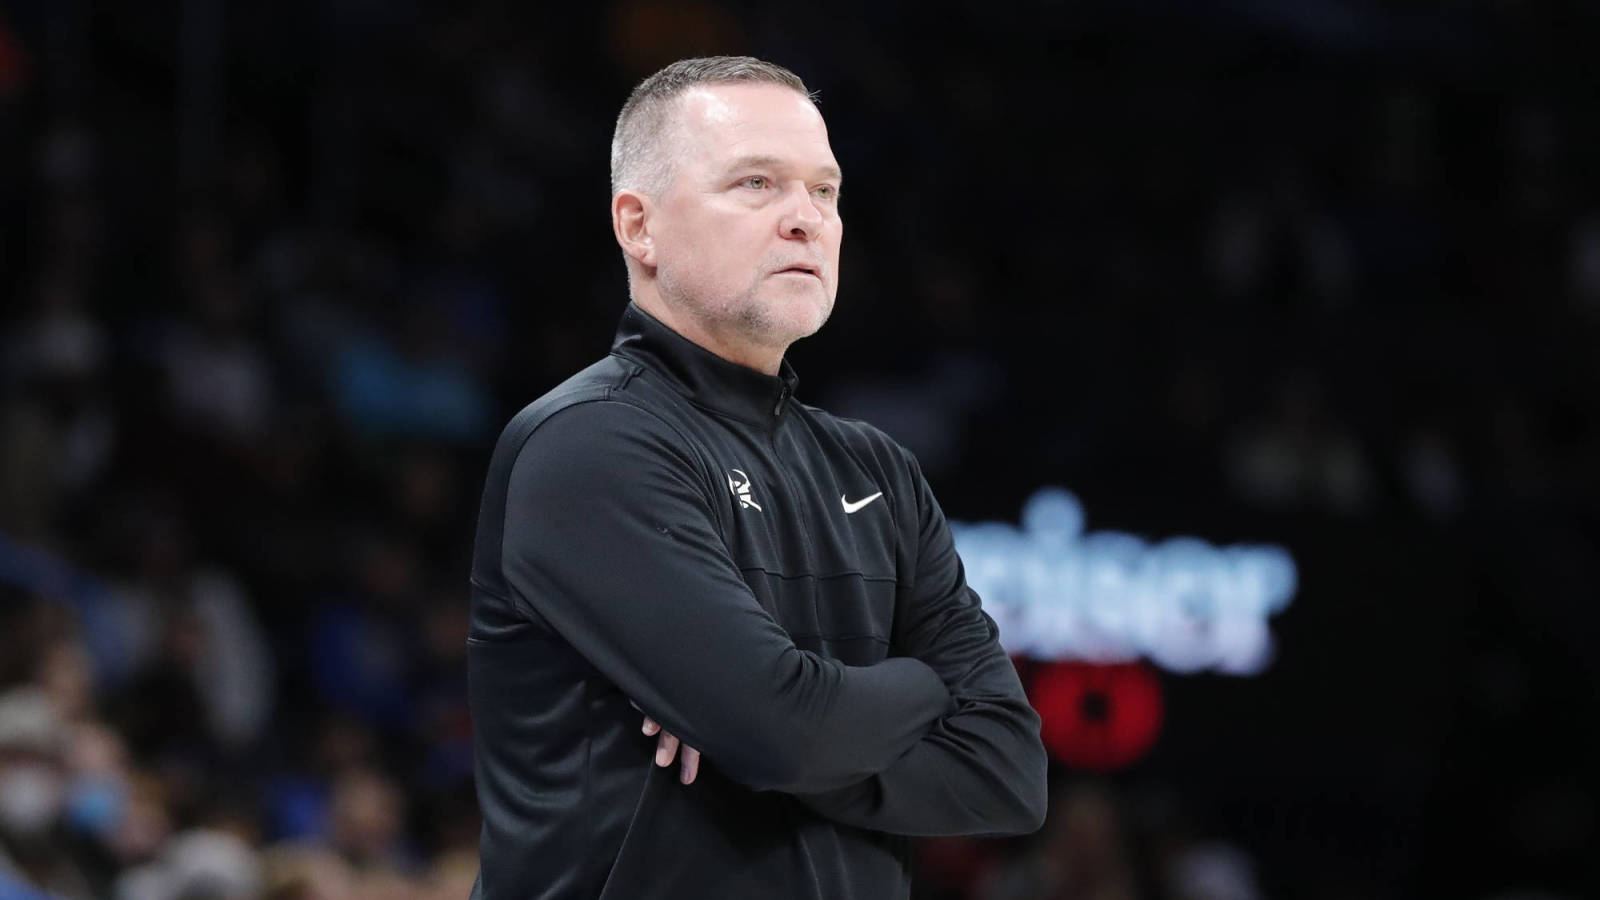 Nuggets HC Michael Malone tests positive for COVID-19, team faces possible outbreak